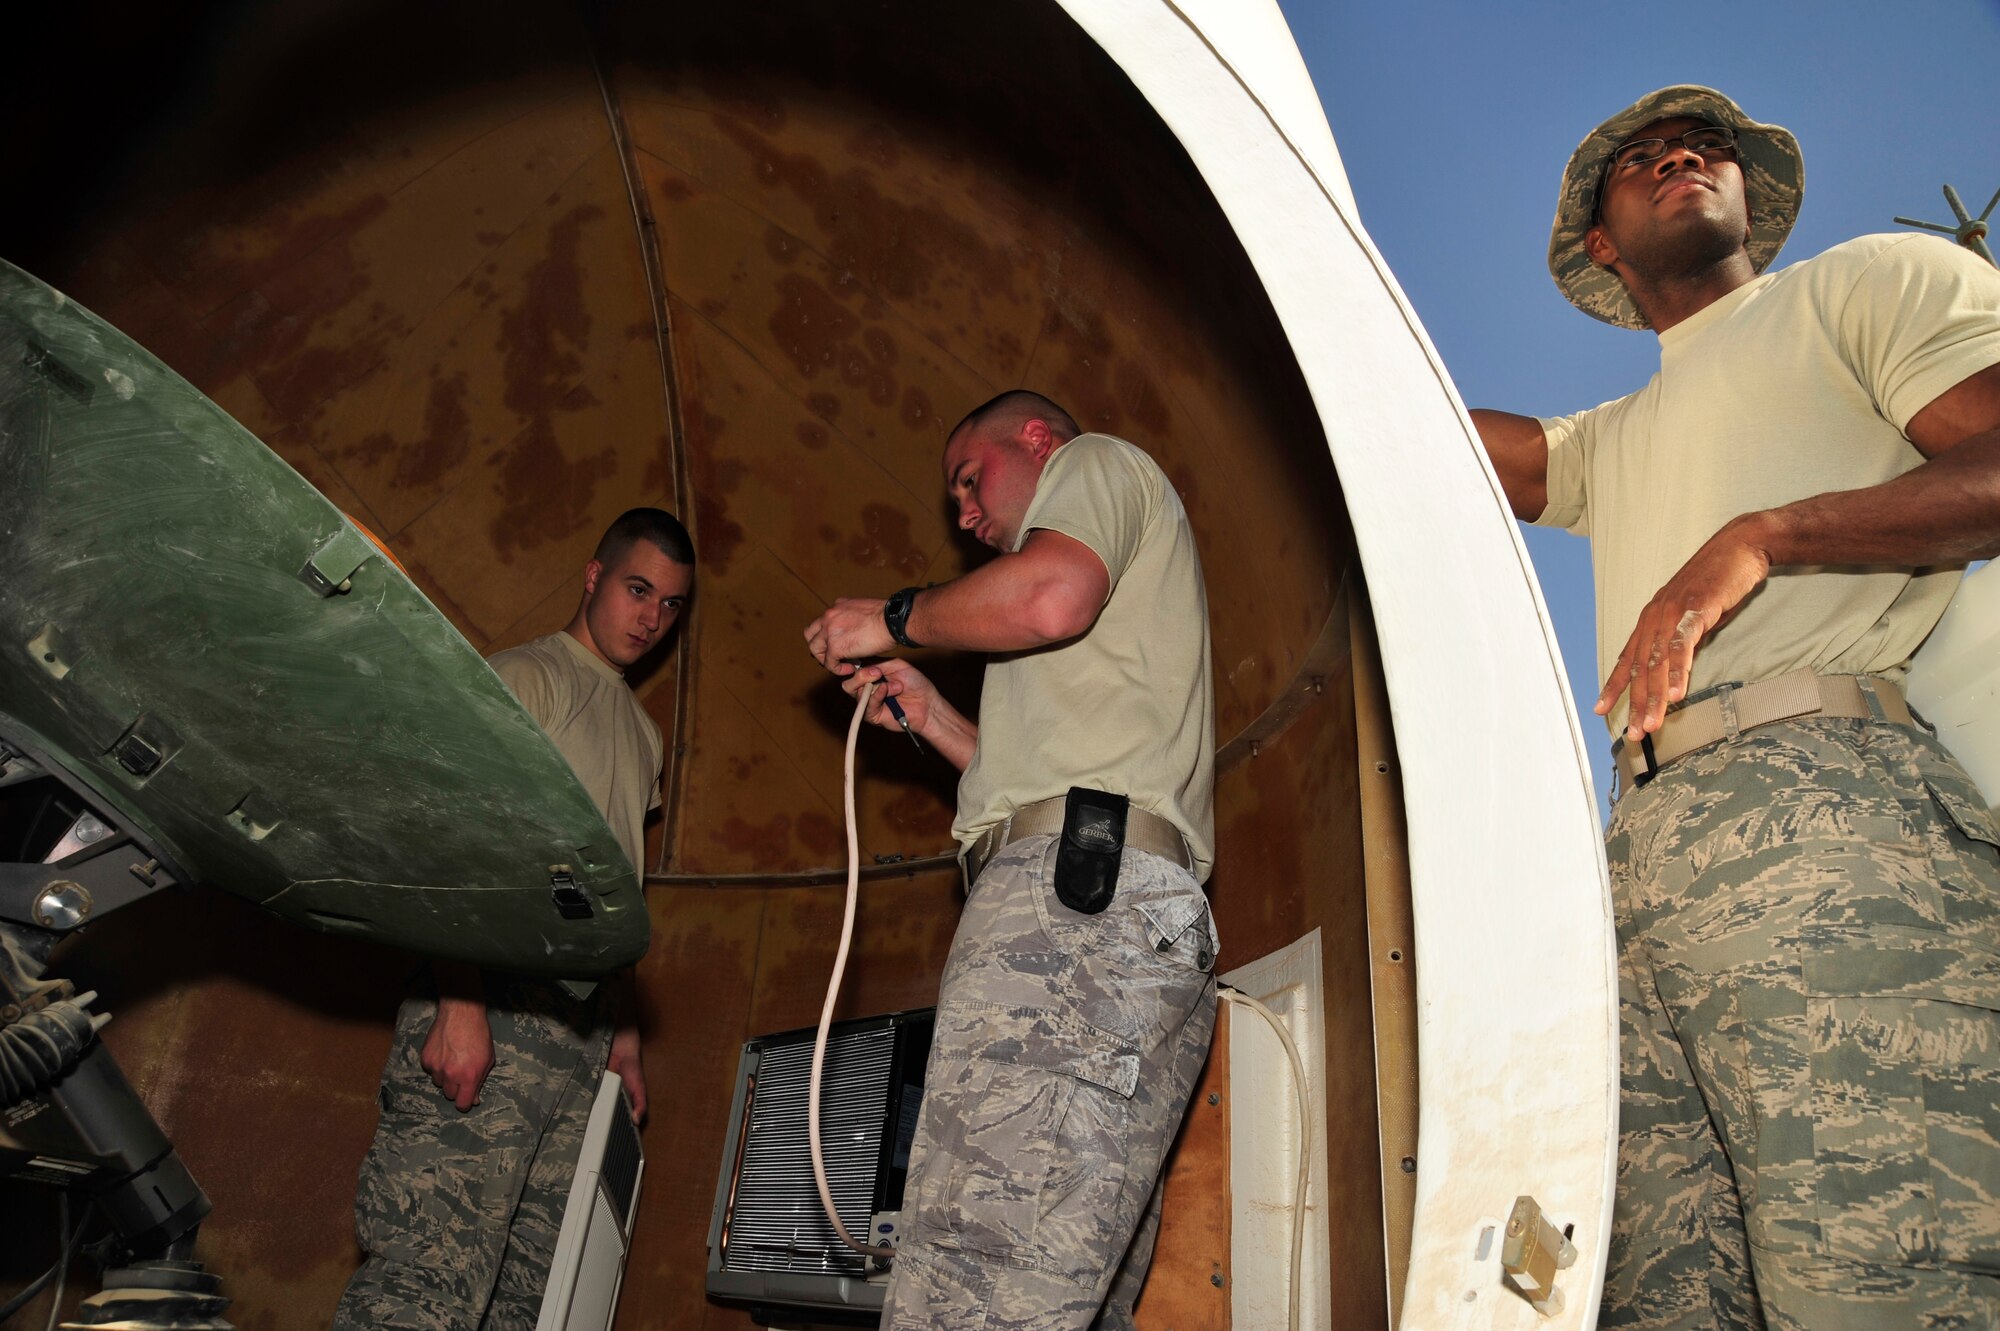 SOUTHWEST ASIA - Staff Sgt. Derek Rhudy, Airman 1st Class Matthew Ventresca and Senior Airman Oliver Abraham, members of  the 380th Expeditionary Civil Engineer Squadron, install a replacement air conditioner unit on the roof of a Communications Squadron building Dec. 17, 2009. Sergeant Rhudy is deployed from Scott Air Force Base, Ill., and grew up in Plainfield, Ind. Airman Ventresca is deployed from McGuire Air Force Base, N.J. and grew up in Philadelphia. Airman Abraham is deployed from Pope Air Force, N.C. and grew up in St. Thomas, U.S. Virgin Islands. (U.S. Air Force photo/Tech. Sgt. Charles Larkin Sr)